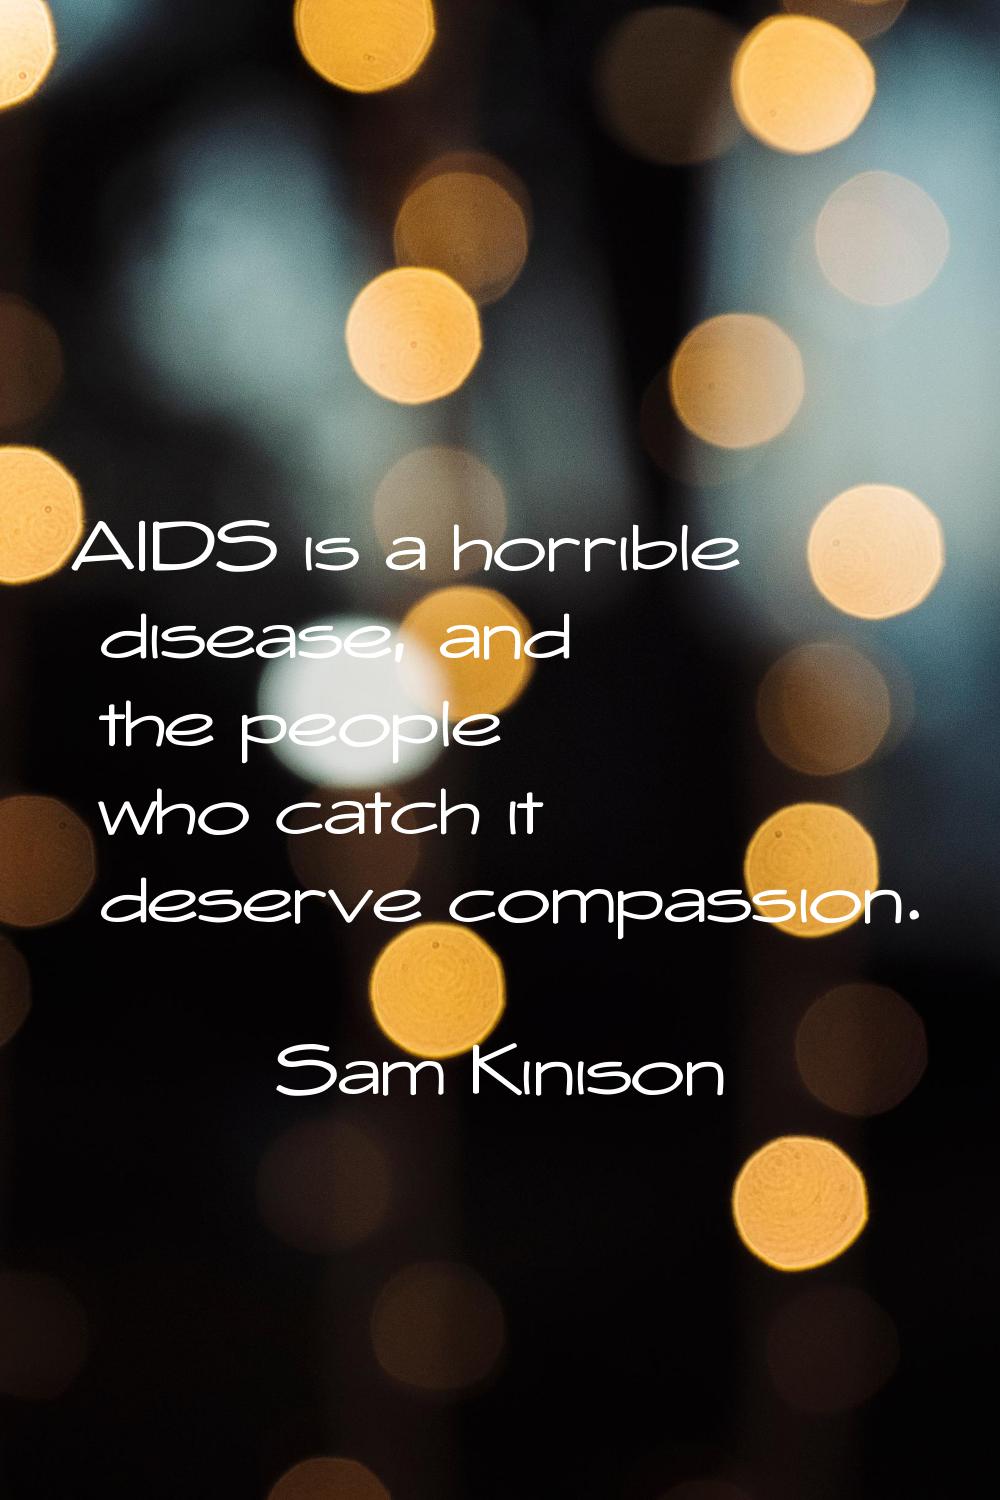 AIDS is a horrible disease, and the people who catch it deserve compassion.